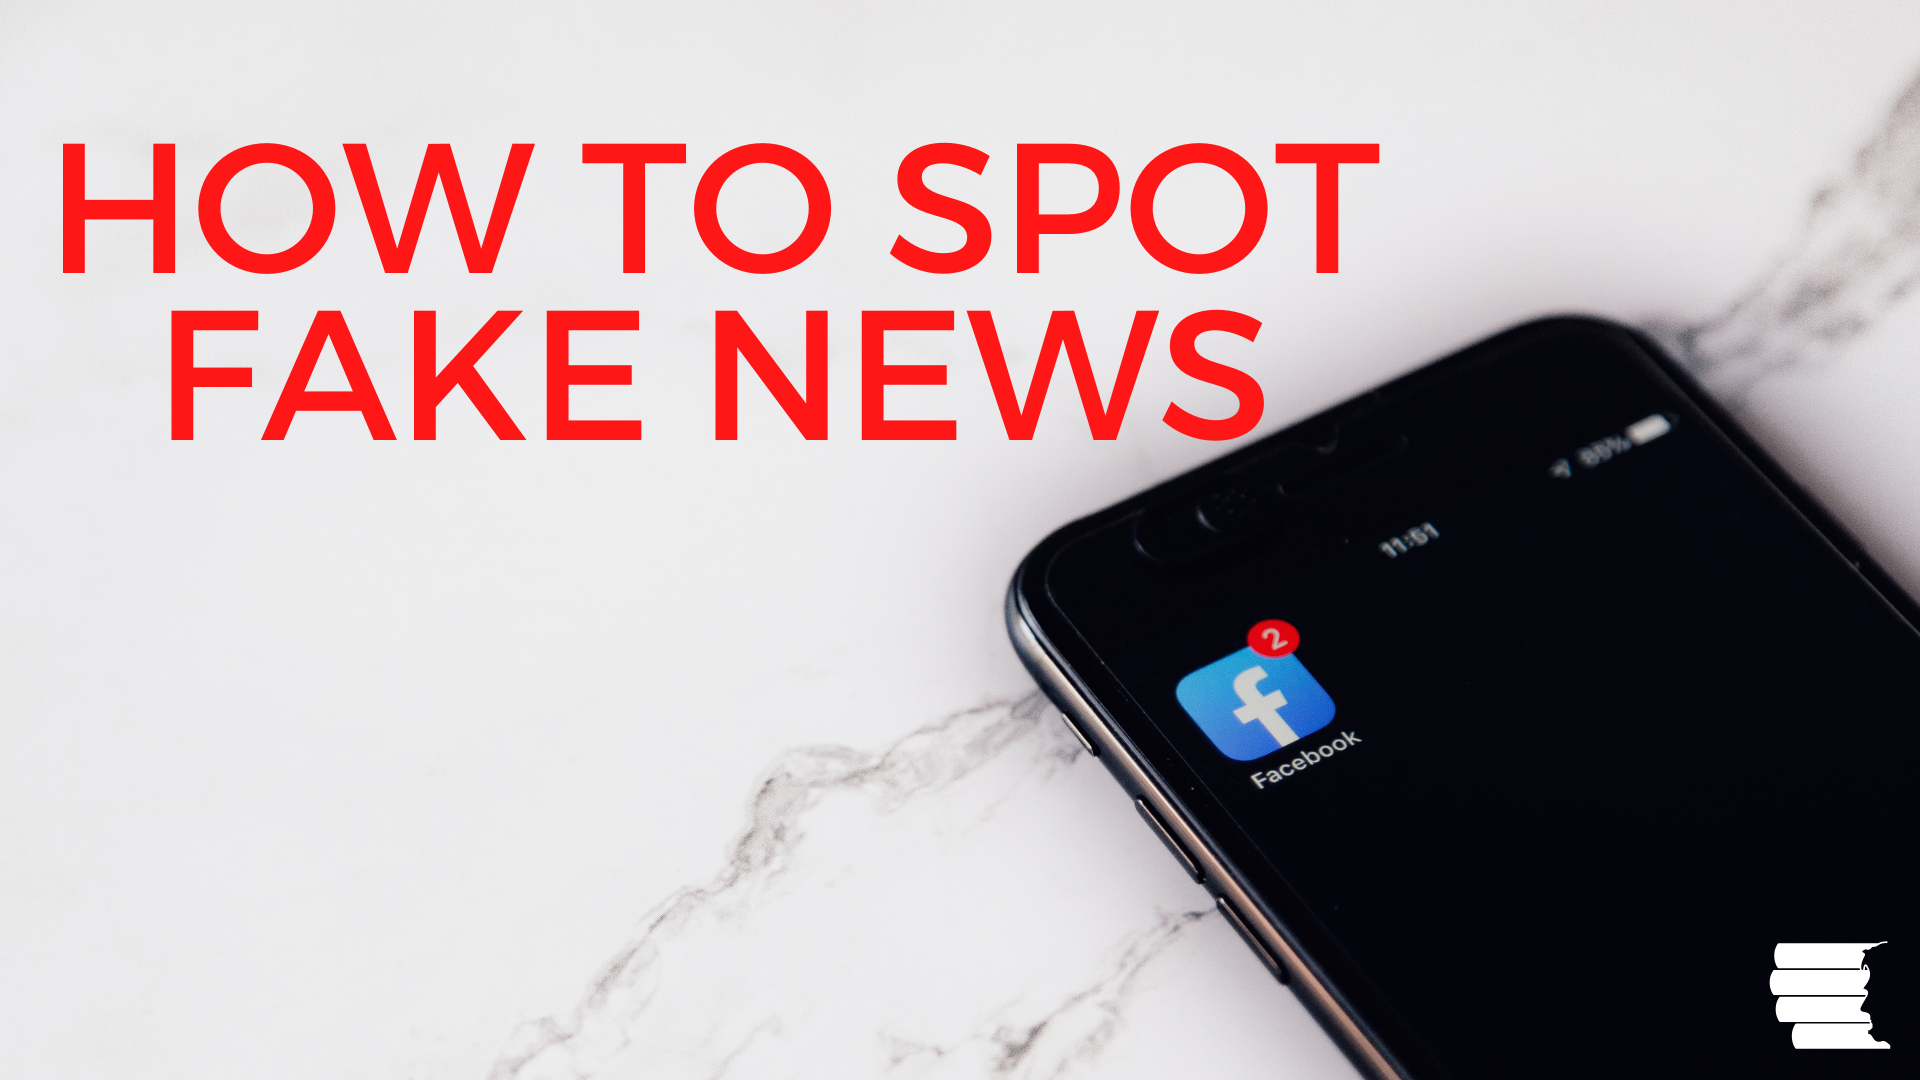 how to spot fake news_iphone on white background